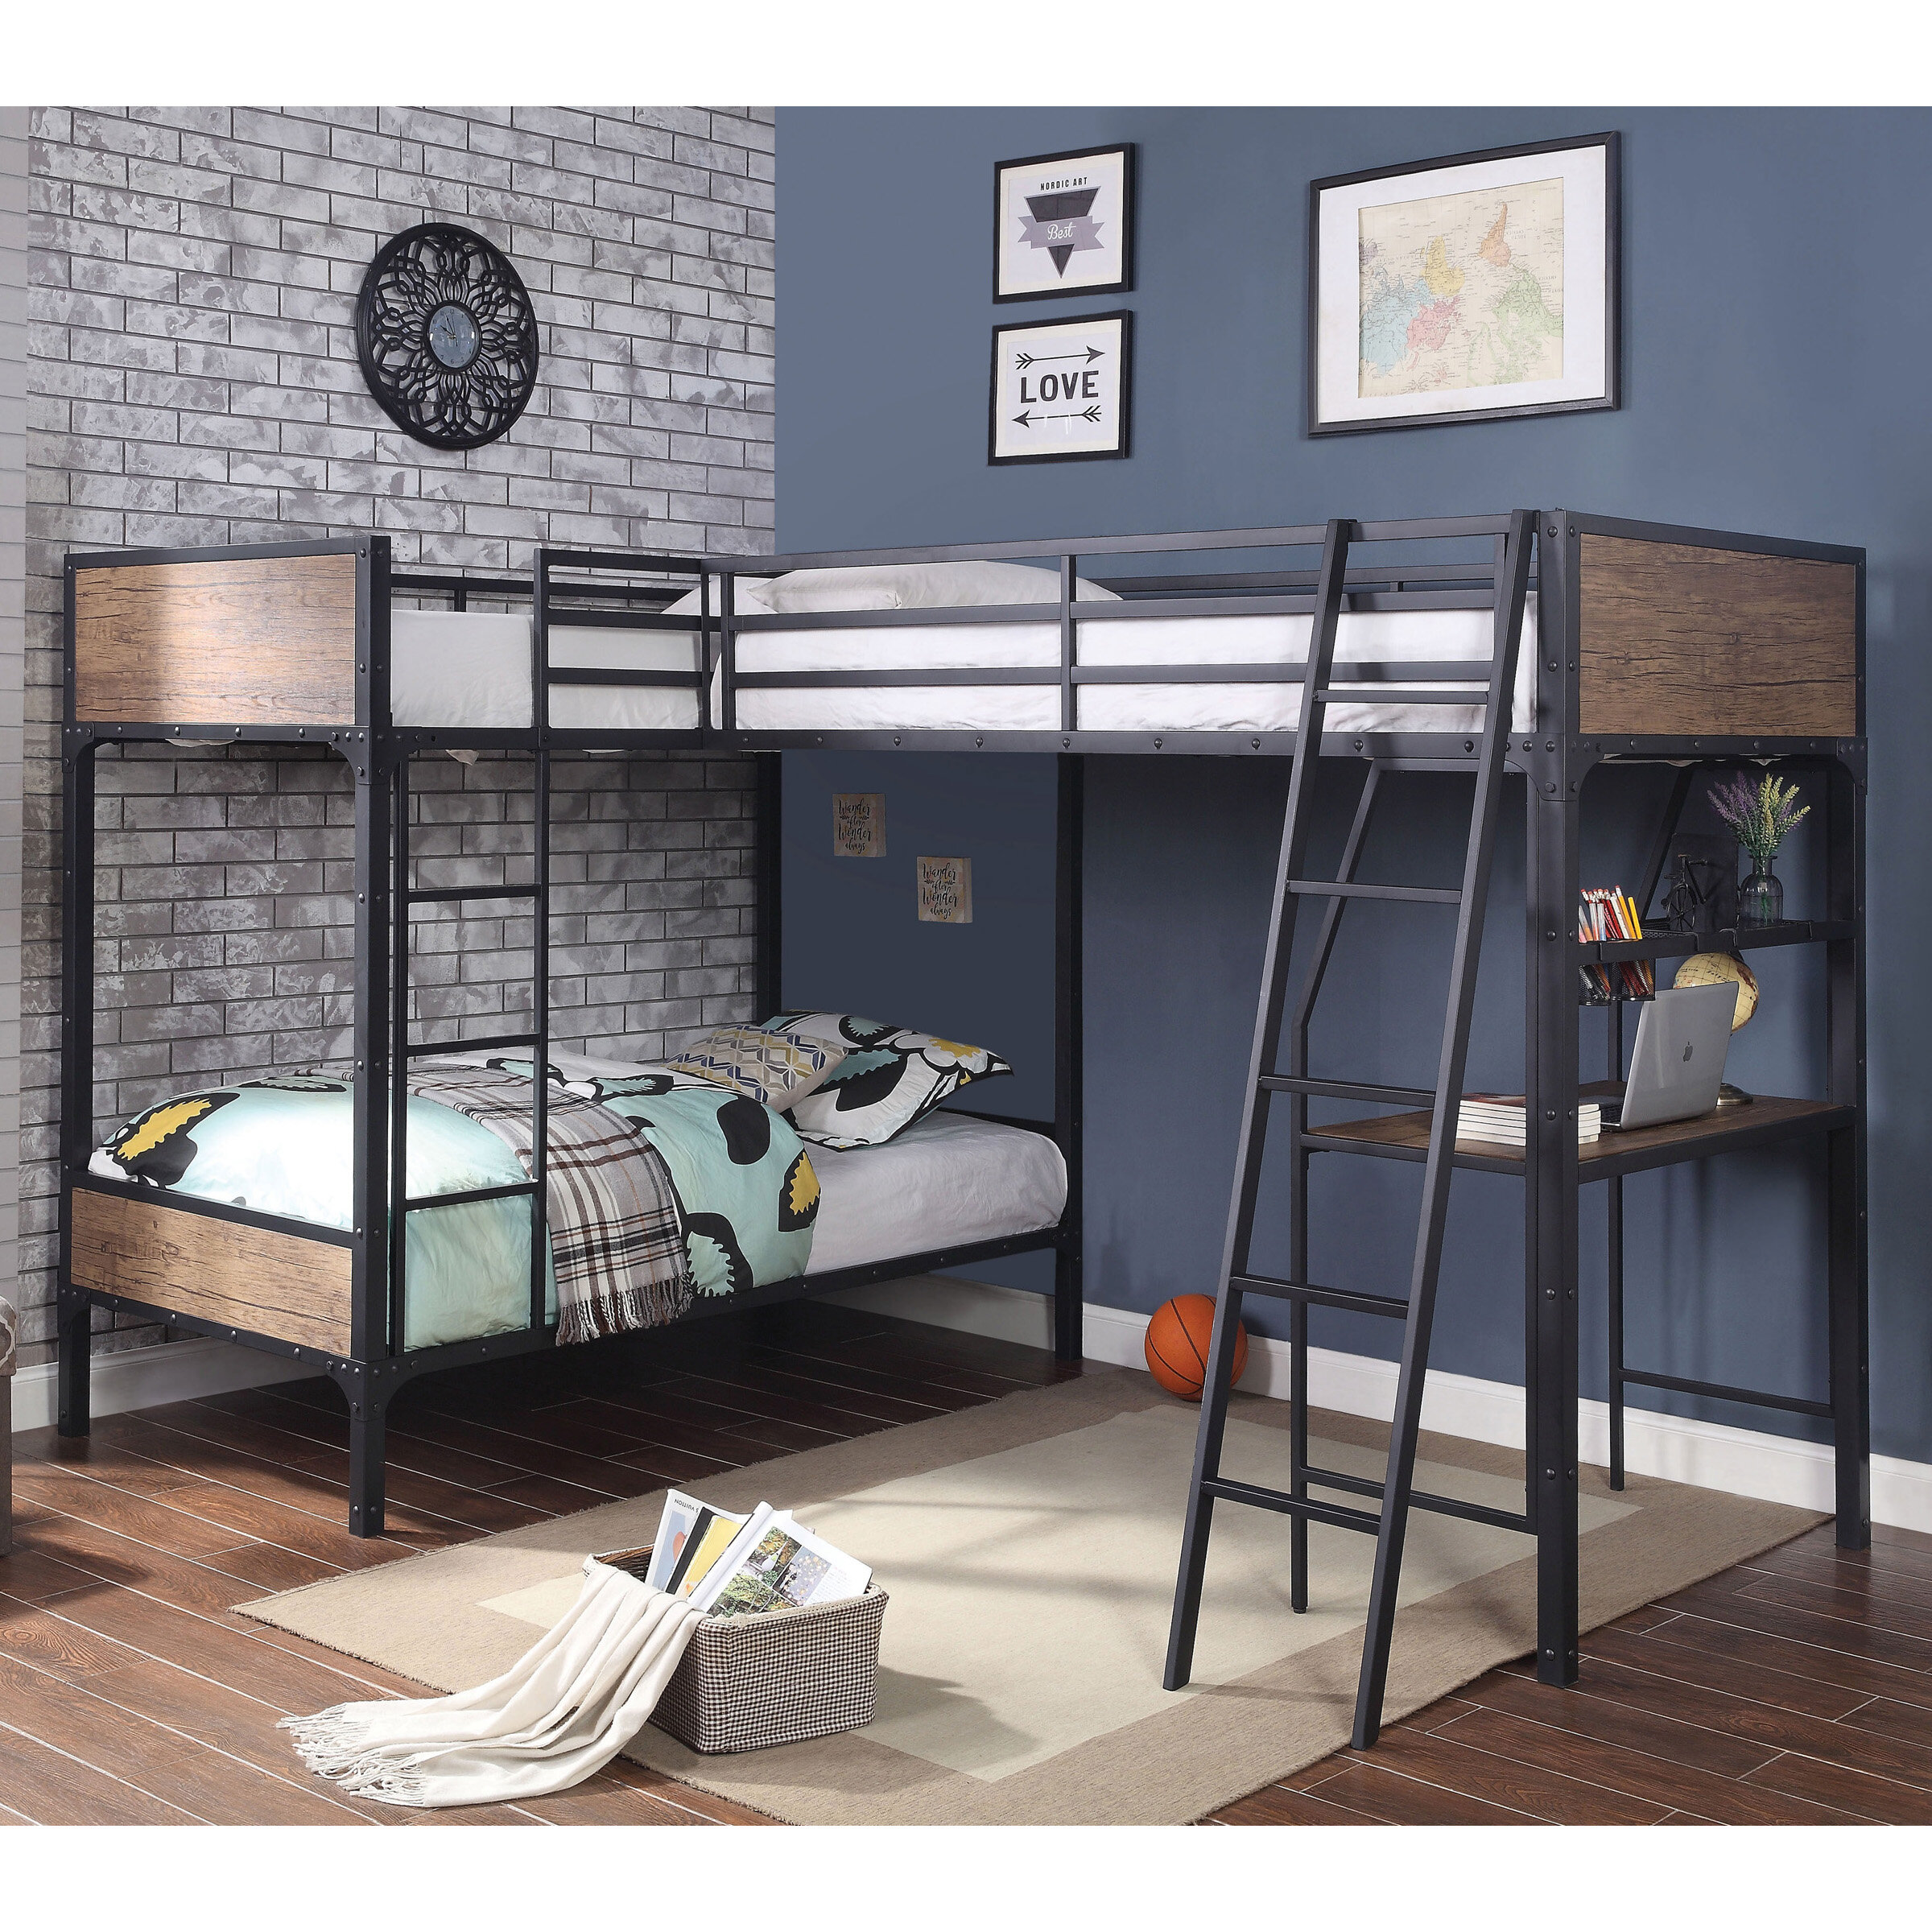 small triple bunk beds